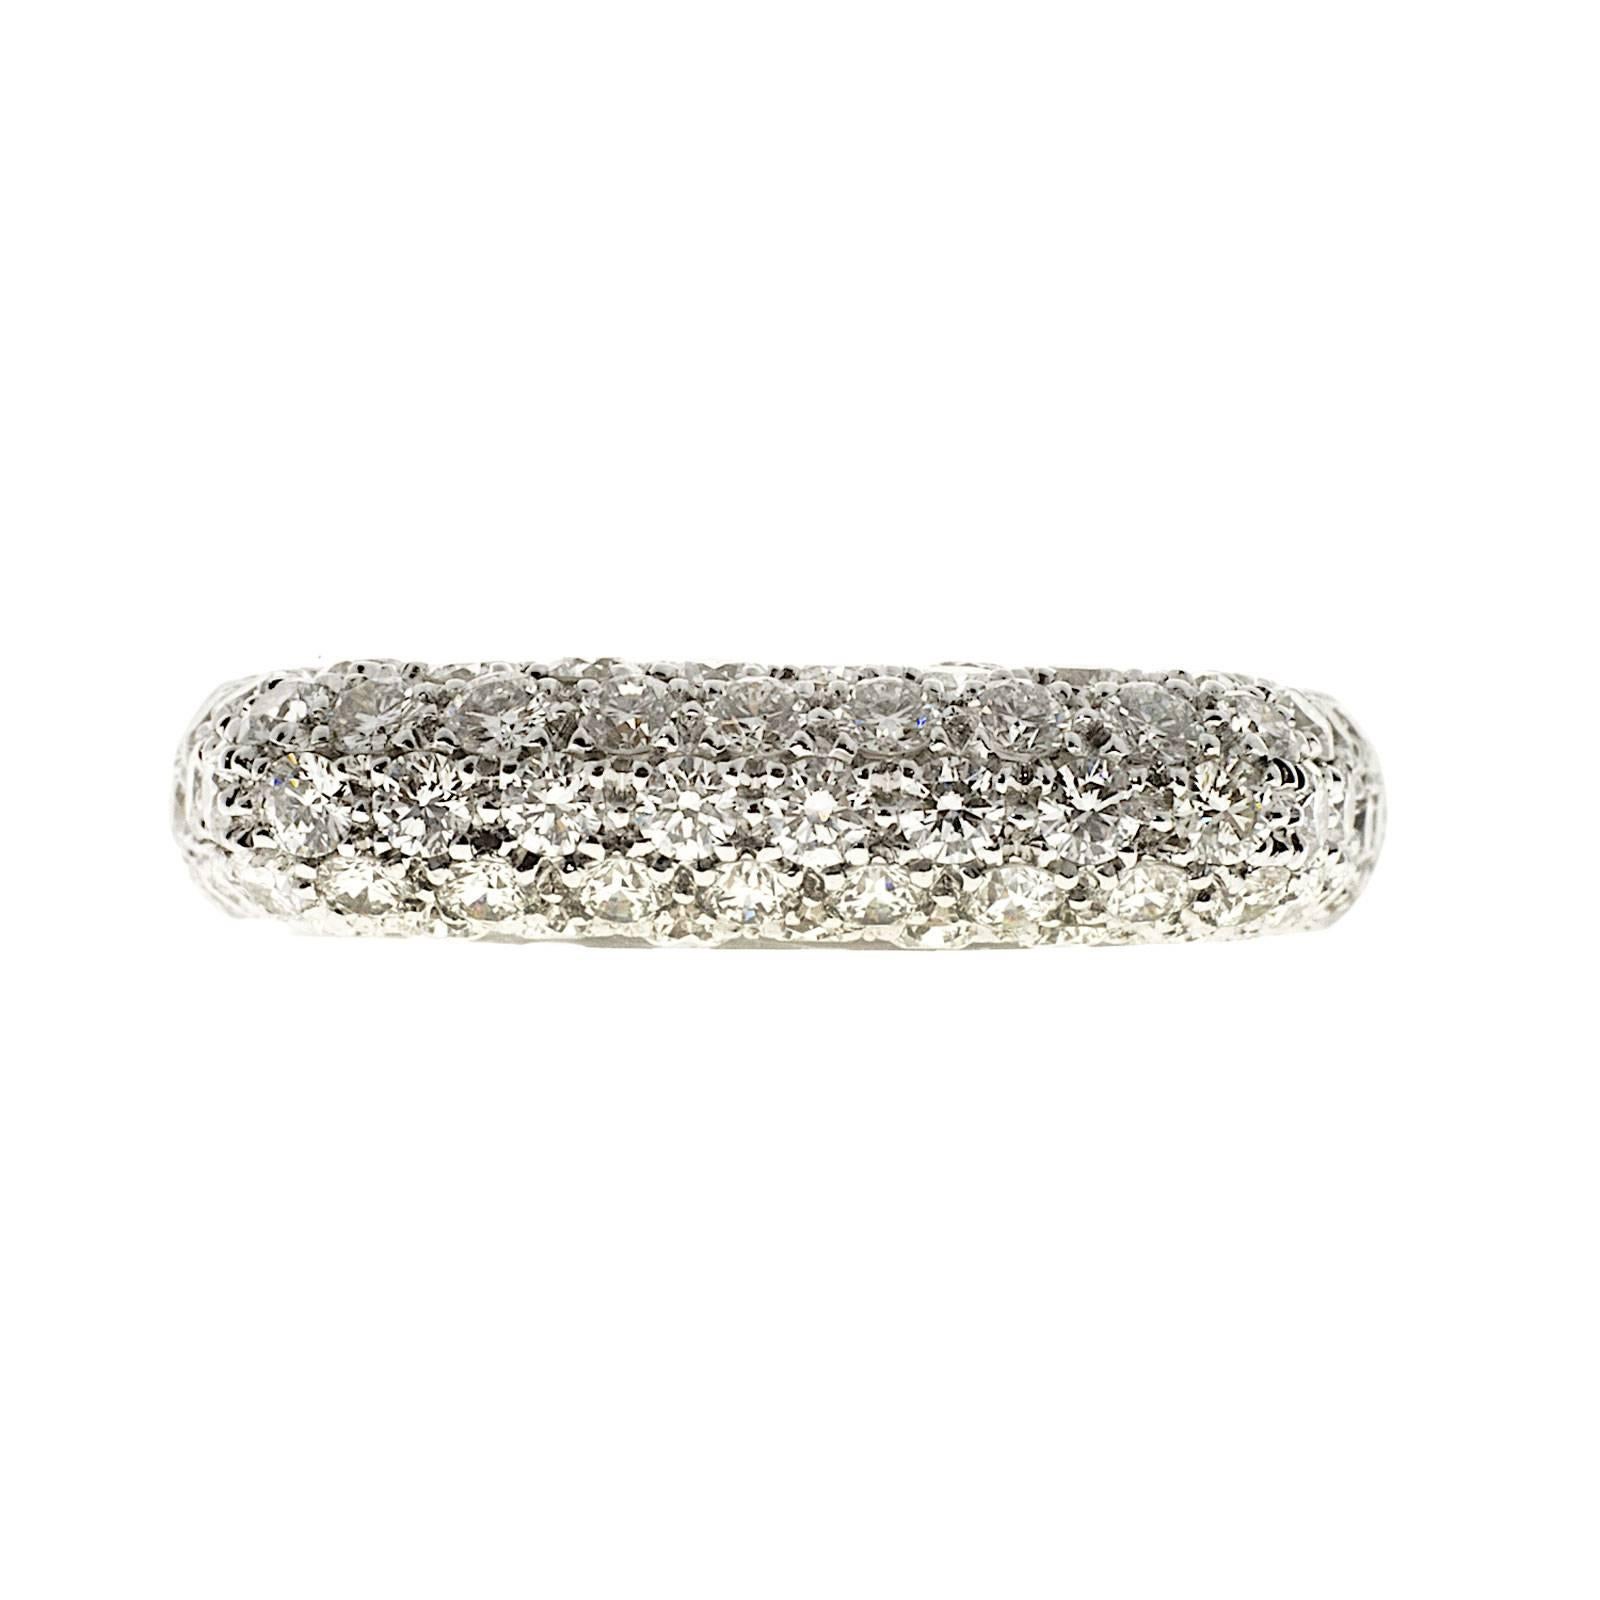 Pave Diamond 1.07 Carat White Gold Dome Ring In Good Condition For Sale In Stamford, CT